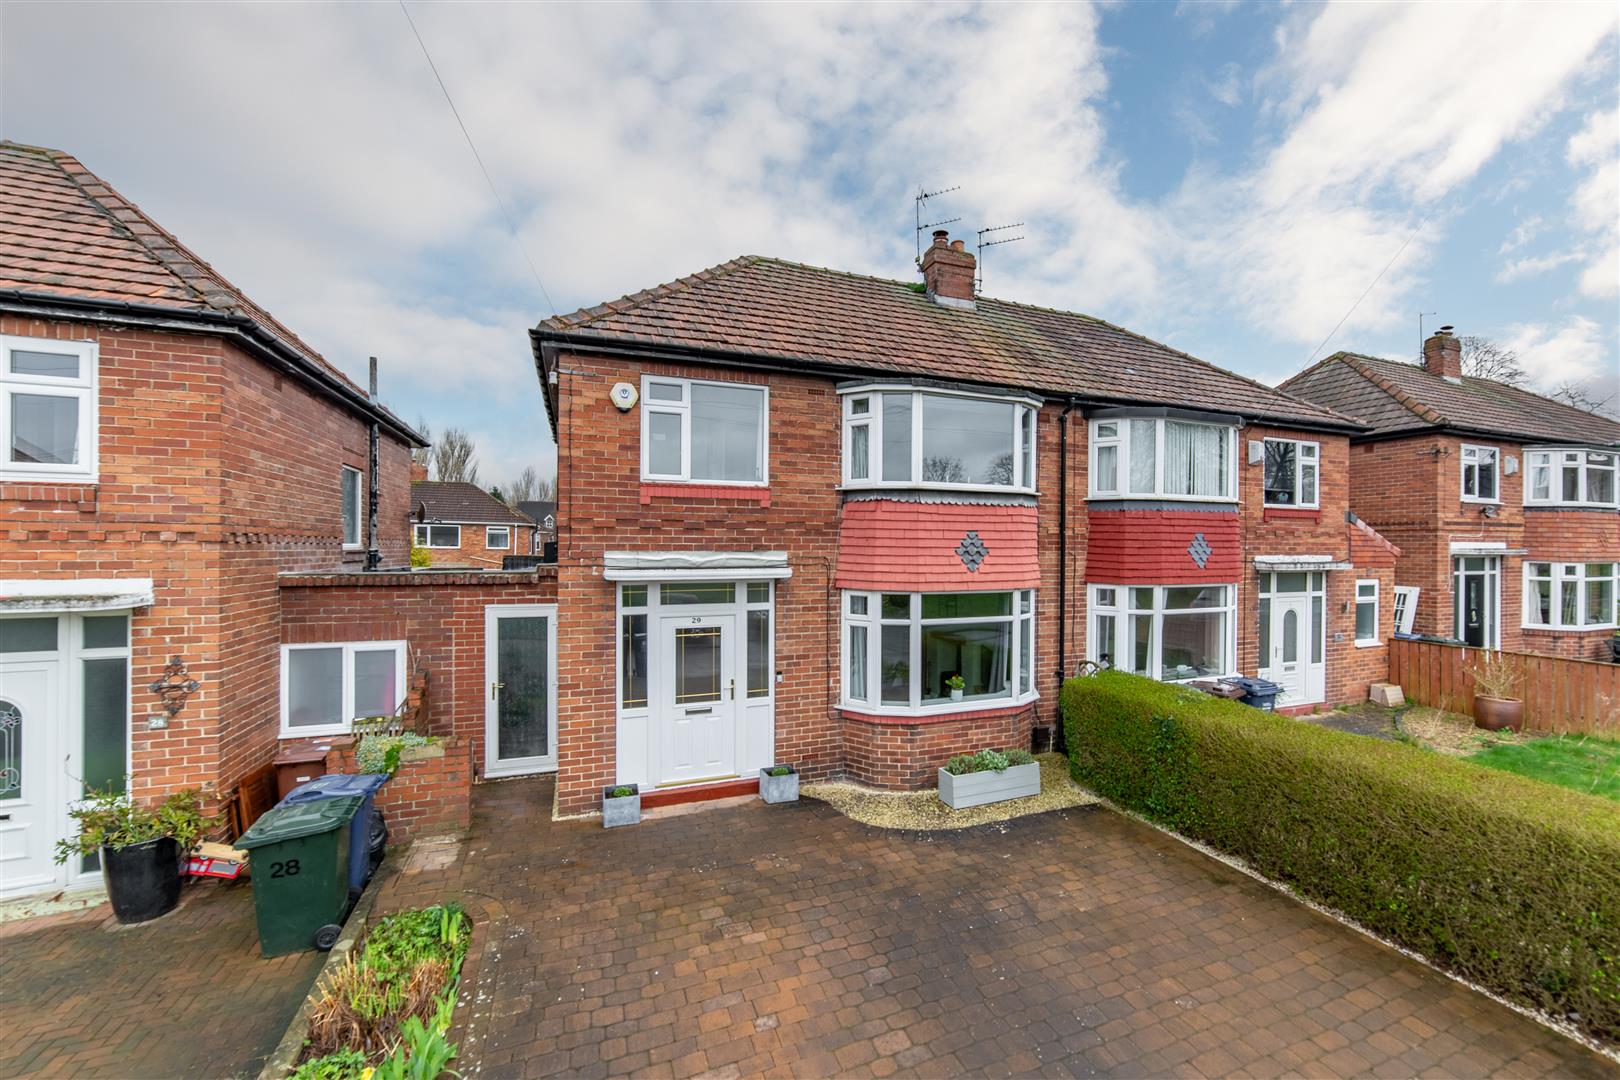 3 bed semi-detached house for sale in Berkeley Square, Newcastle Upon Tyne, NE3 